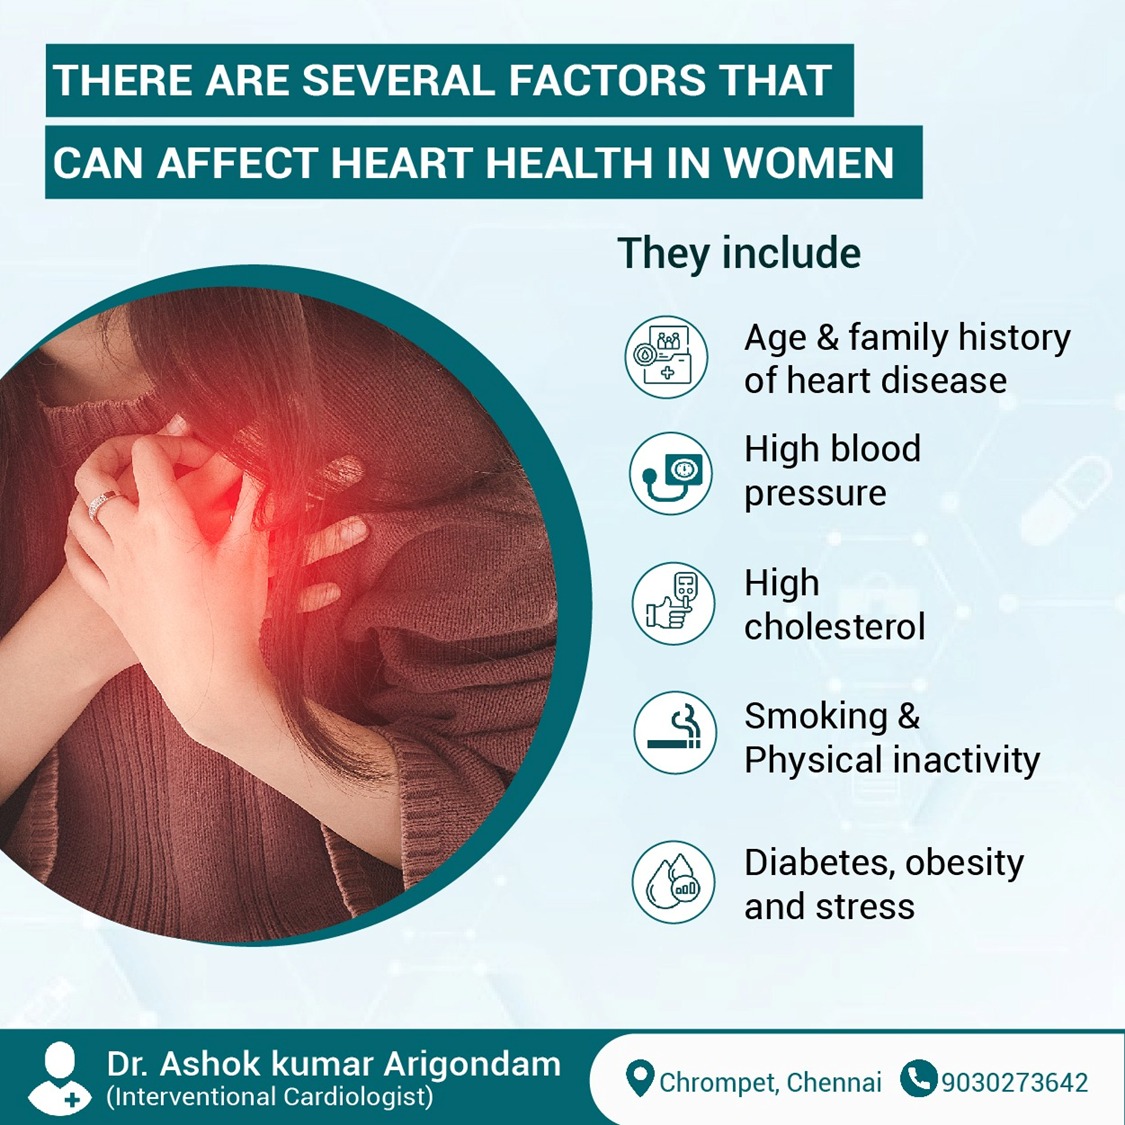 Women may also be at higher risk of heart disease if they have experienced certain pregnancy-related conditions, such as preeclampsia or gestational diabetes. 

Call us for more information : 90302 73642

#WomenHeartHealth #HeartDiseaseInWomen  #DrAshokKumarArigondam